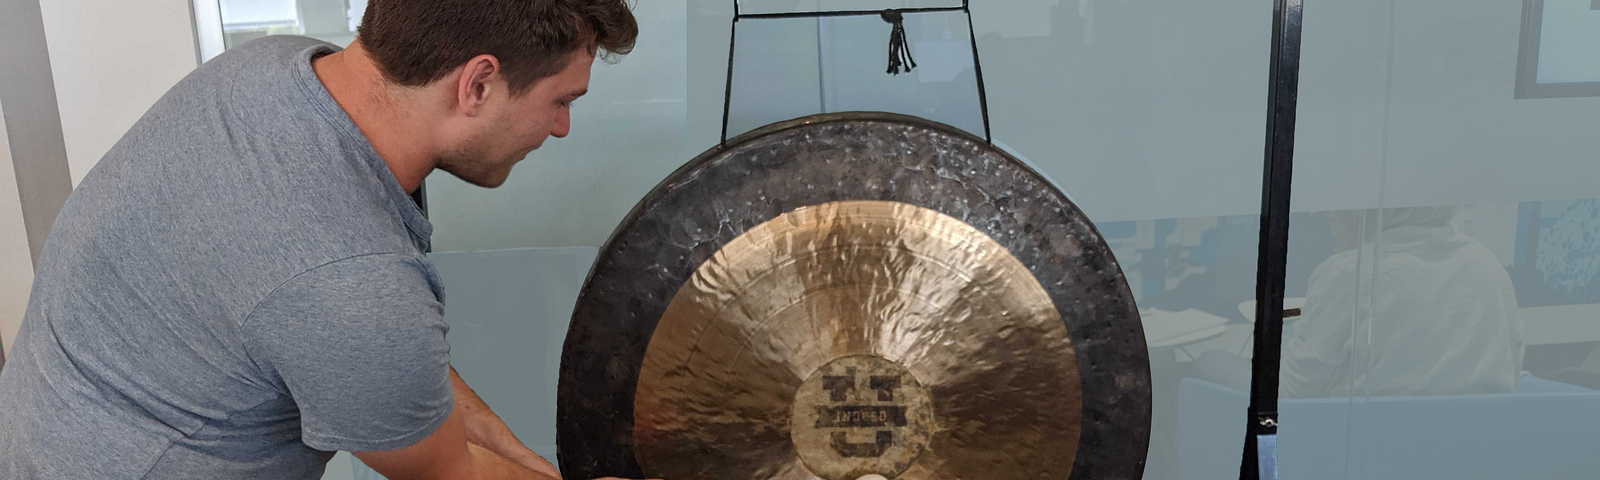 A new Indeedian bangs a gong to signal the completion of their first experiment